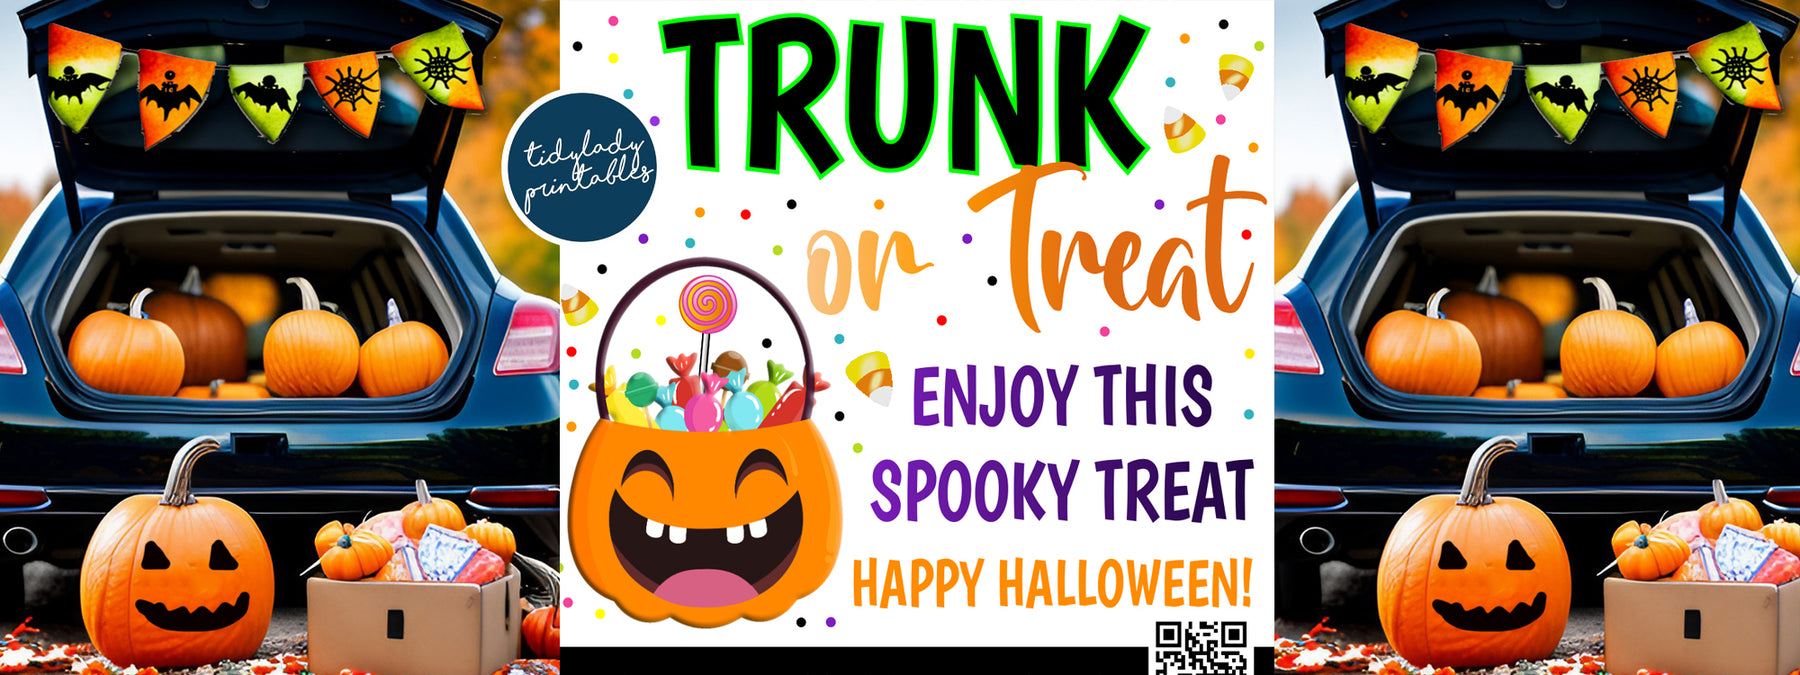 A Spooktacular Guide for Planning A Halloween Trunk or Treat Fundraiser with Editable Templates